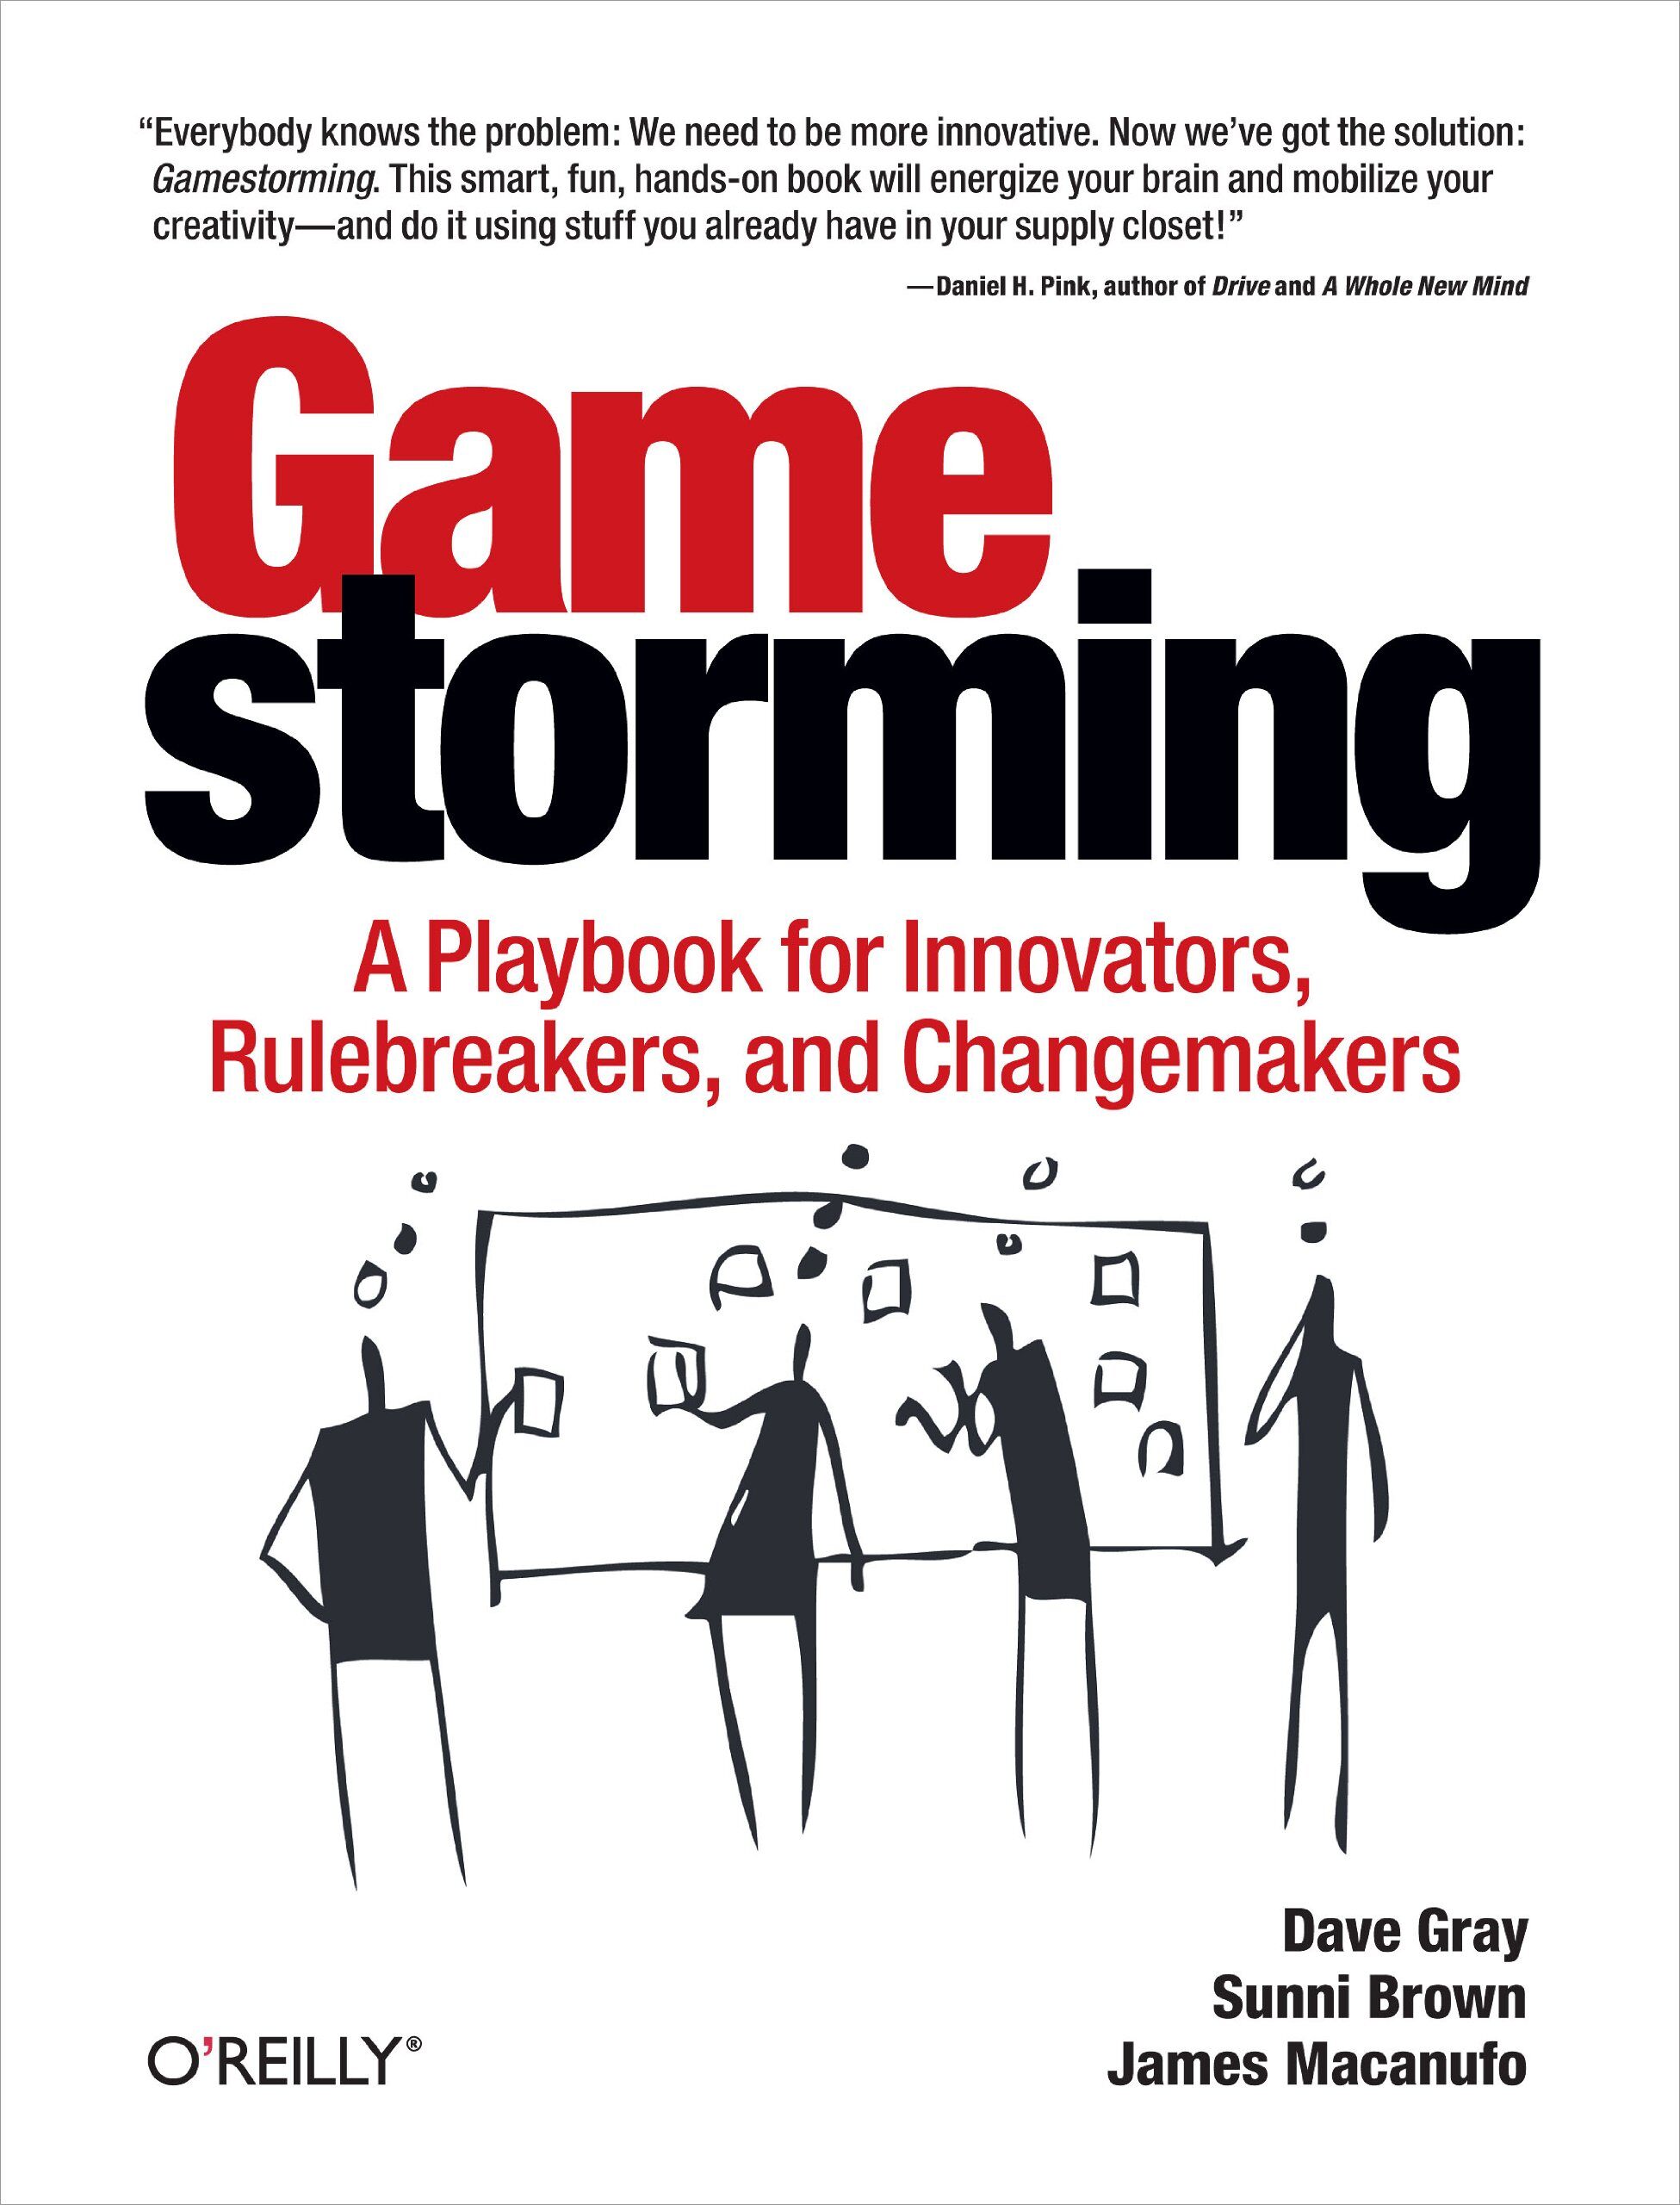 『Gamestorming』  ～A Playbook for Innovators, Rulebreakers, and Changemakers～